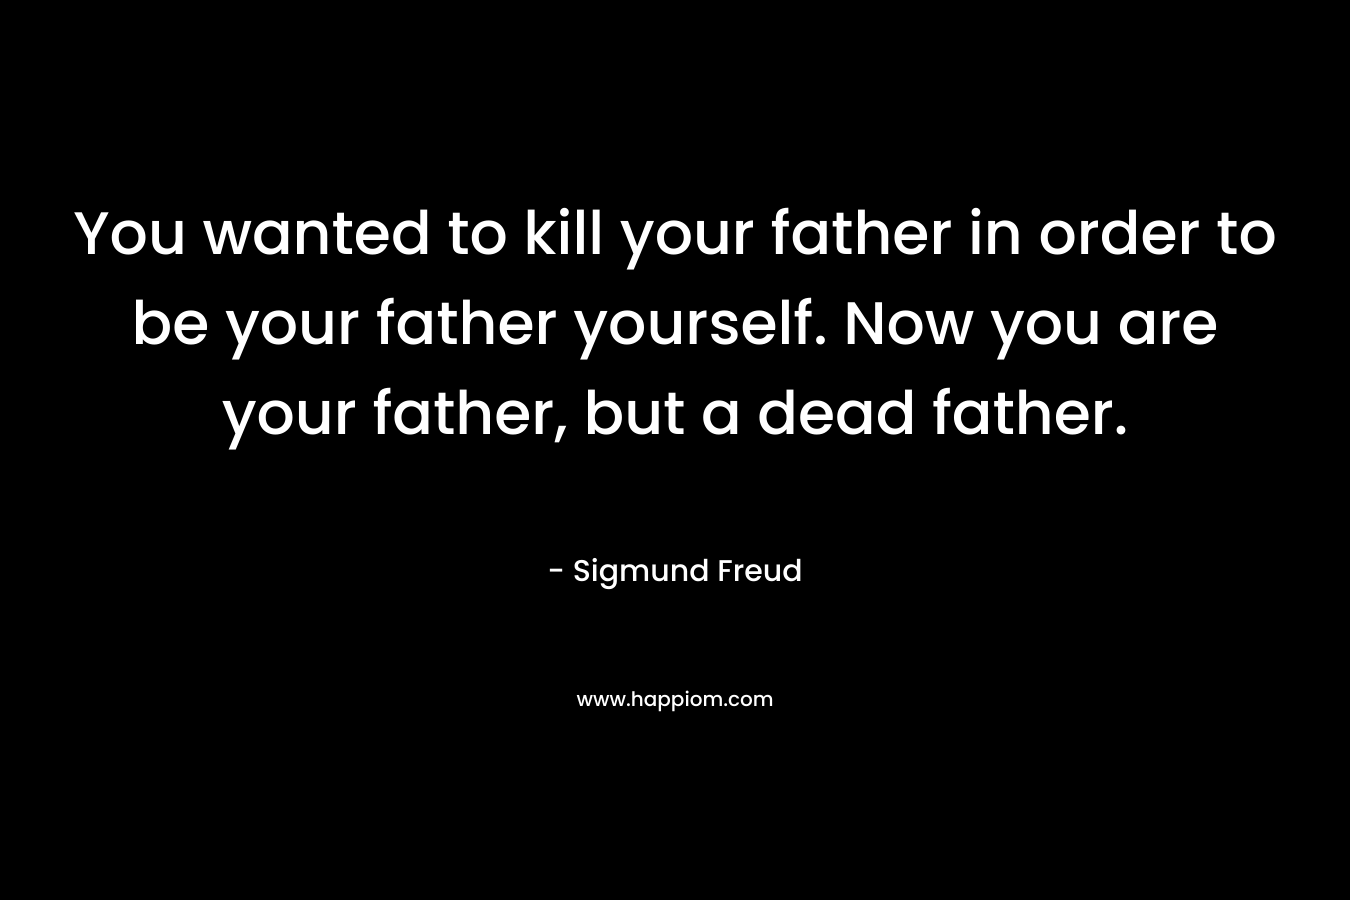 You wanted to kill your father in order to be your father yourself. Now you are your father, but a dead father.